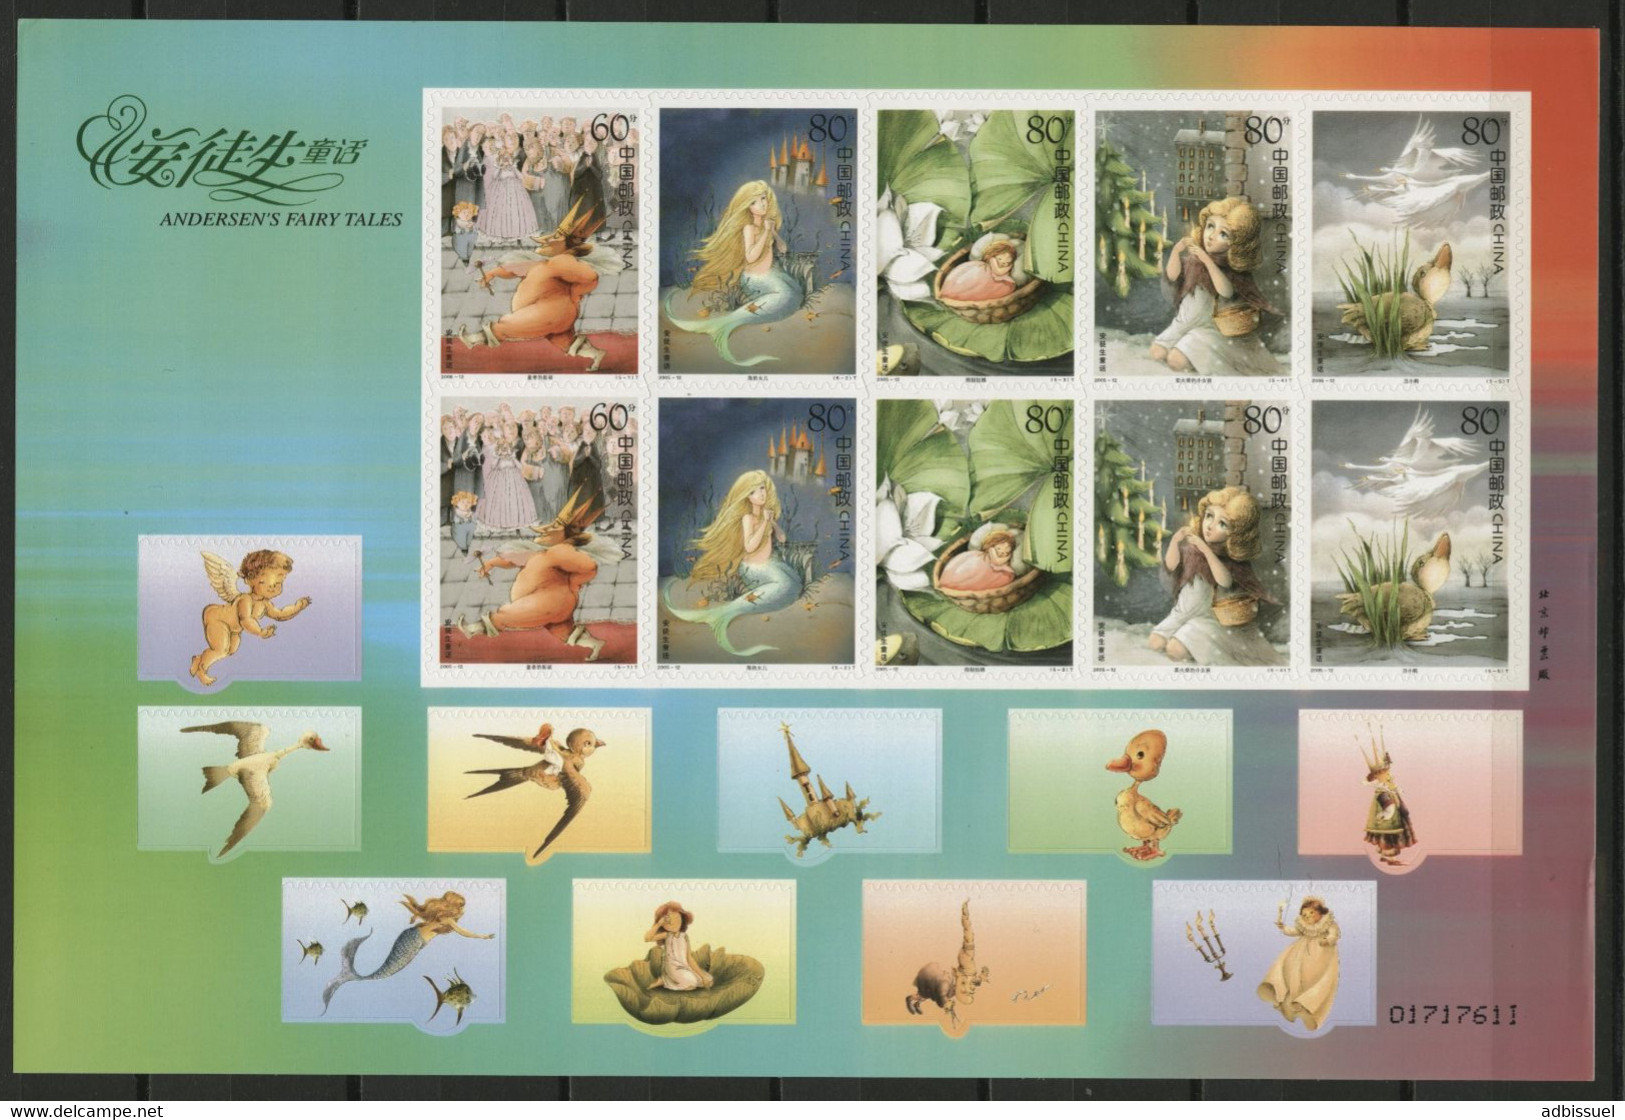 CHINA / CHINE 2005 Self Adhesive Sheet, Andersen's Fairy Tales / Feuillet Autoadhésif, Contes D'Andersen. ** MNH. VG/TB - Ungebraucht